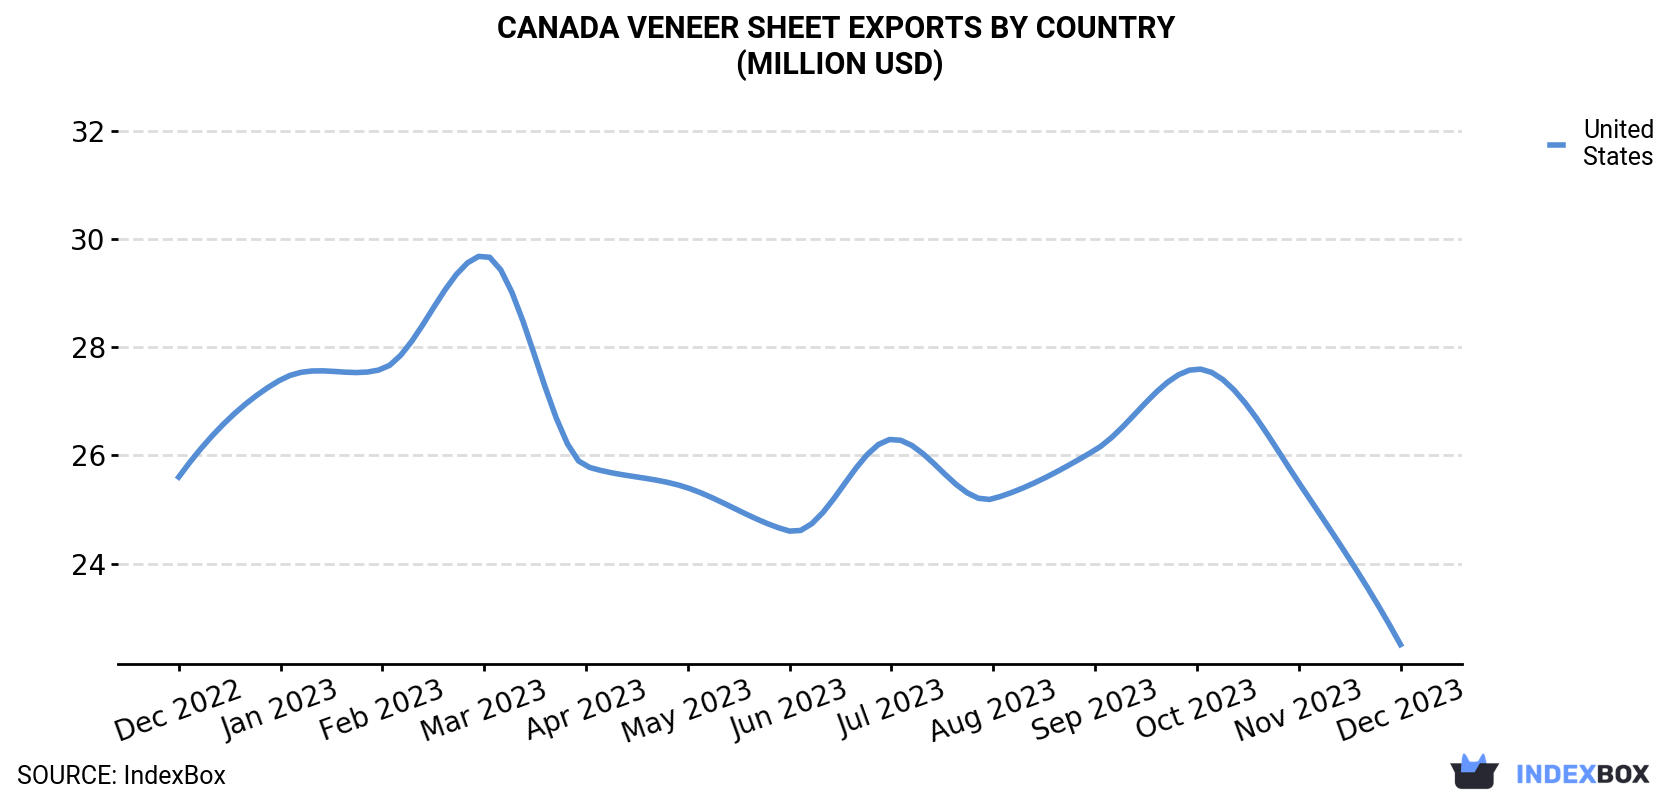 Canada Veneer Sheet Exports By Country (Million USD)